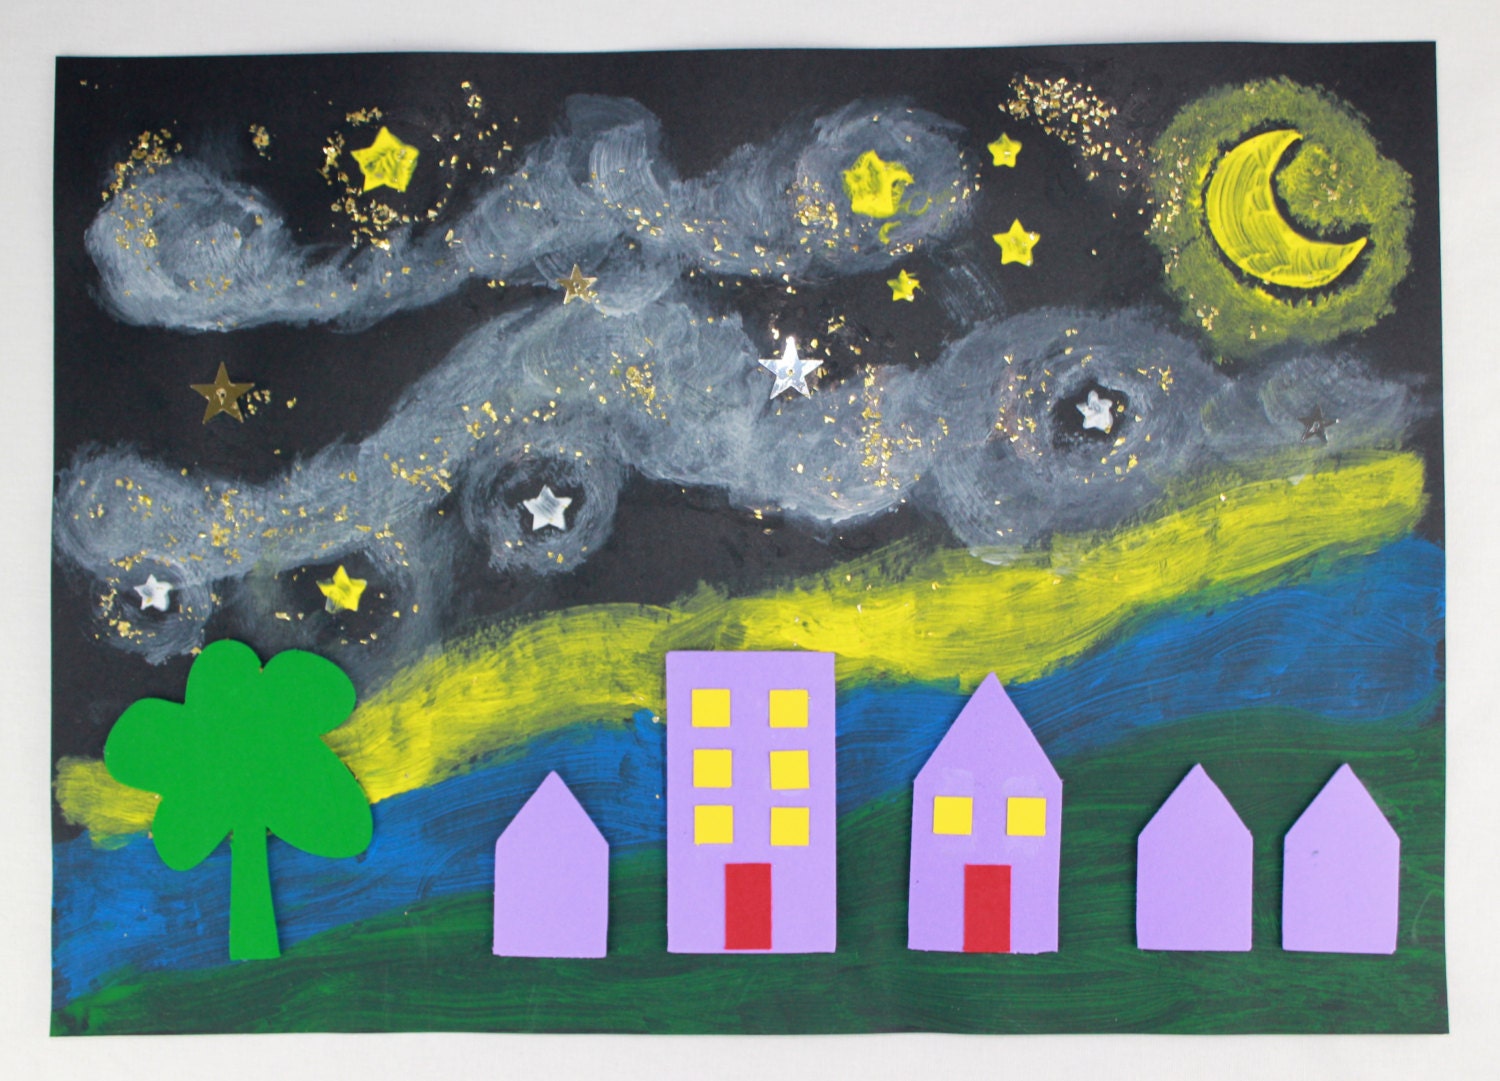 Starry Night Sky Art Project for Kids - Buggy and Buddy